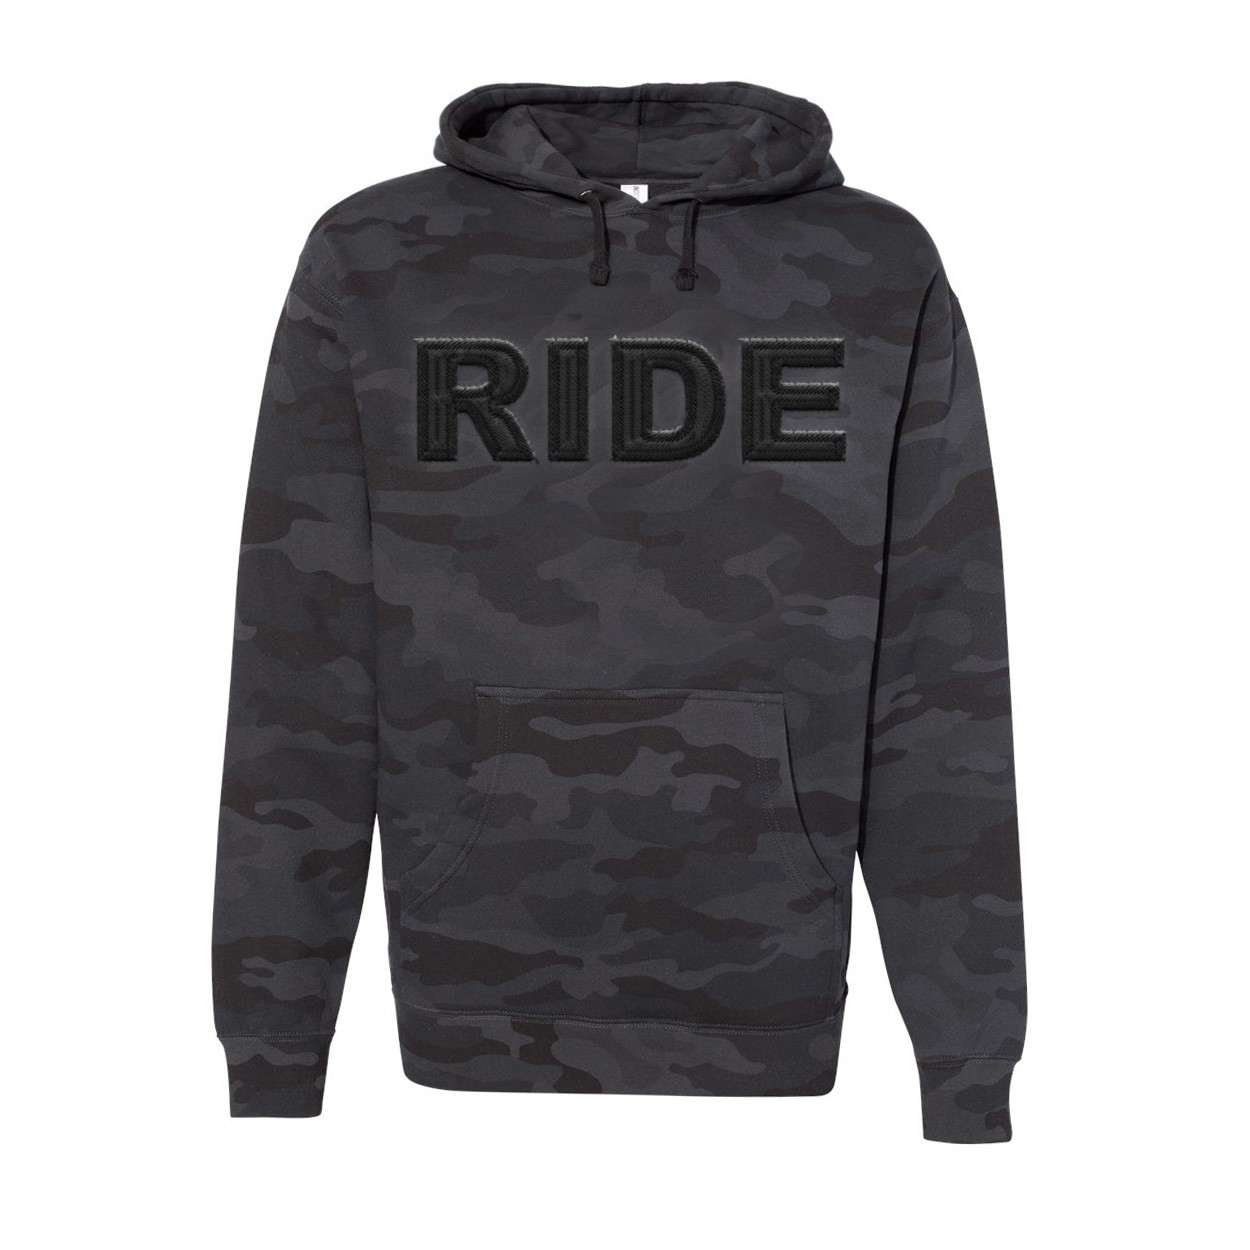 Ride Brand Logo Pro Tackle Twill Embroidered Hooded Sweatshirt Black Camo